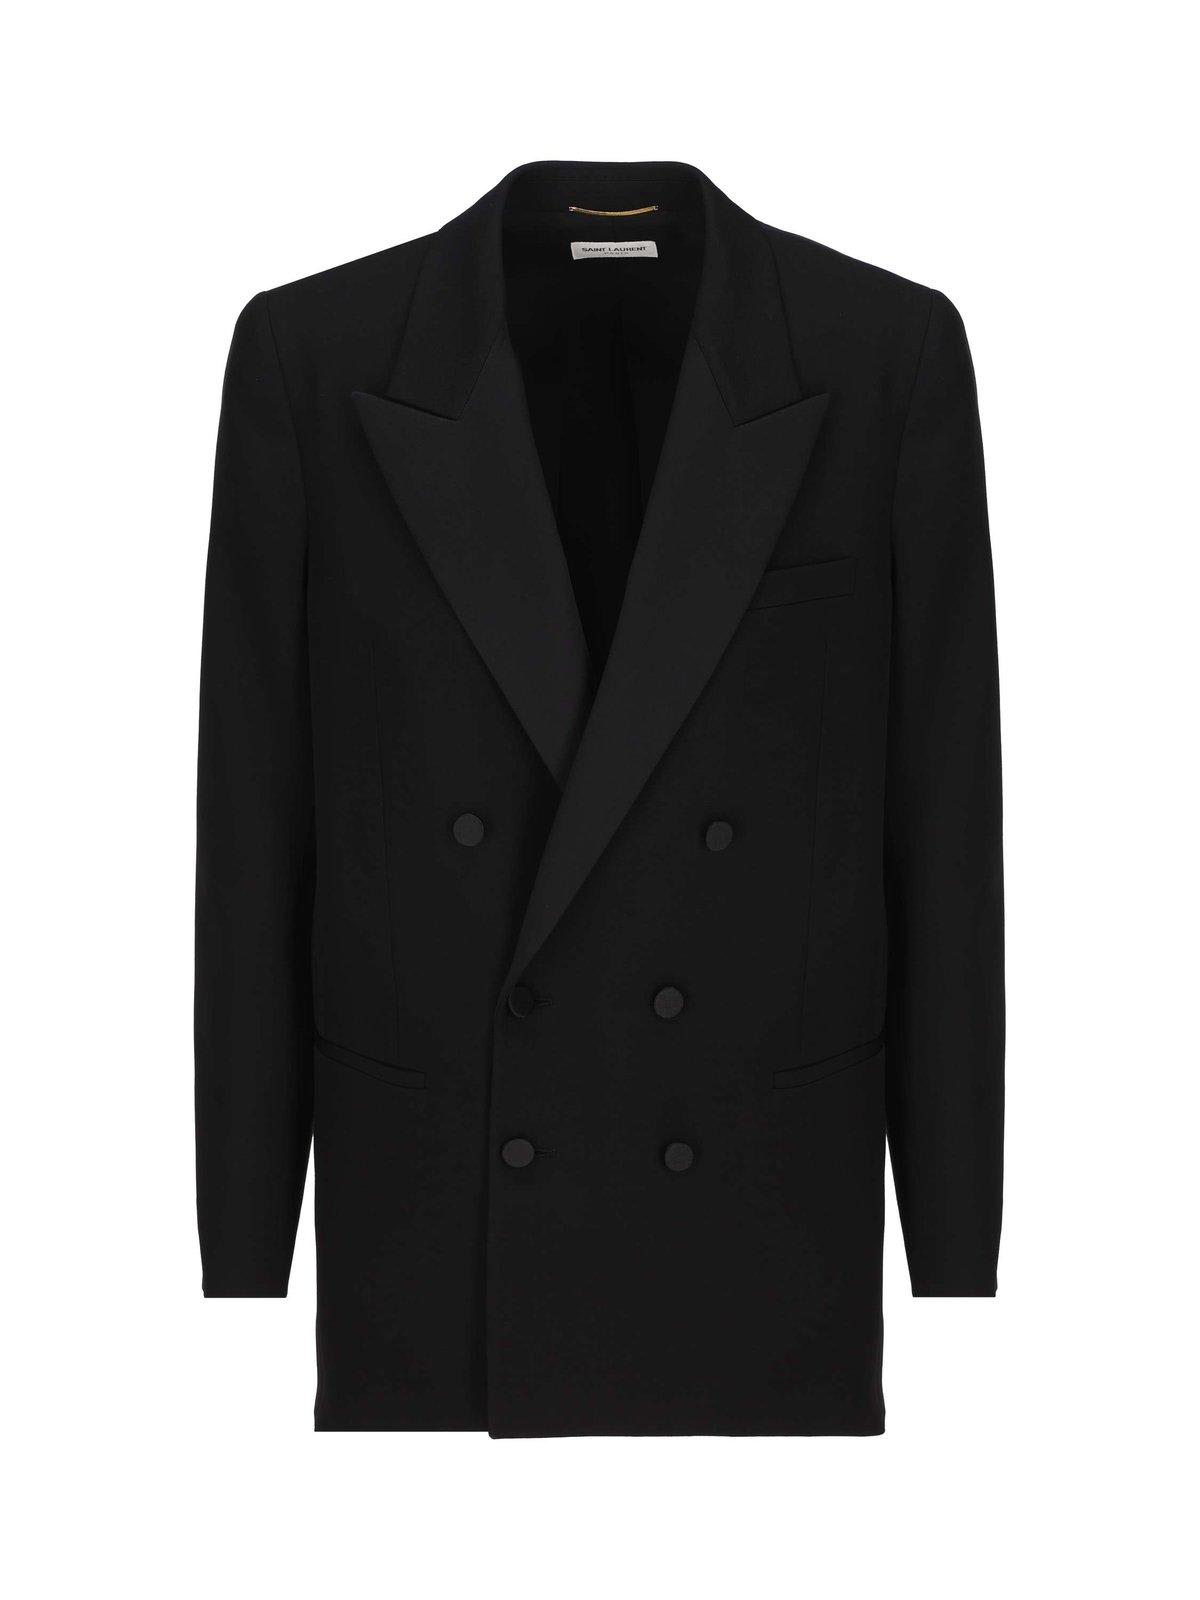 SAINT LAURENT DOUBLE-BREASTED LONG-SLEEVED BLAZER